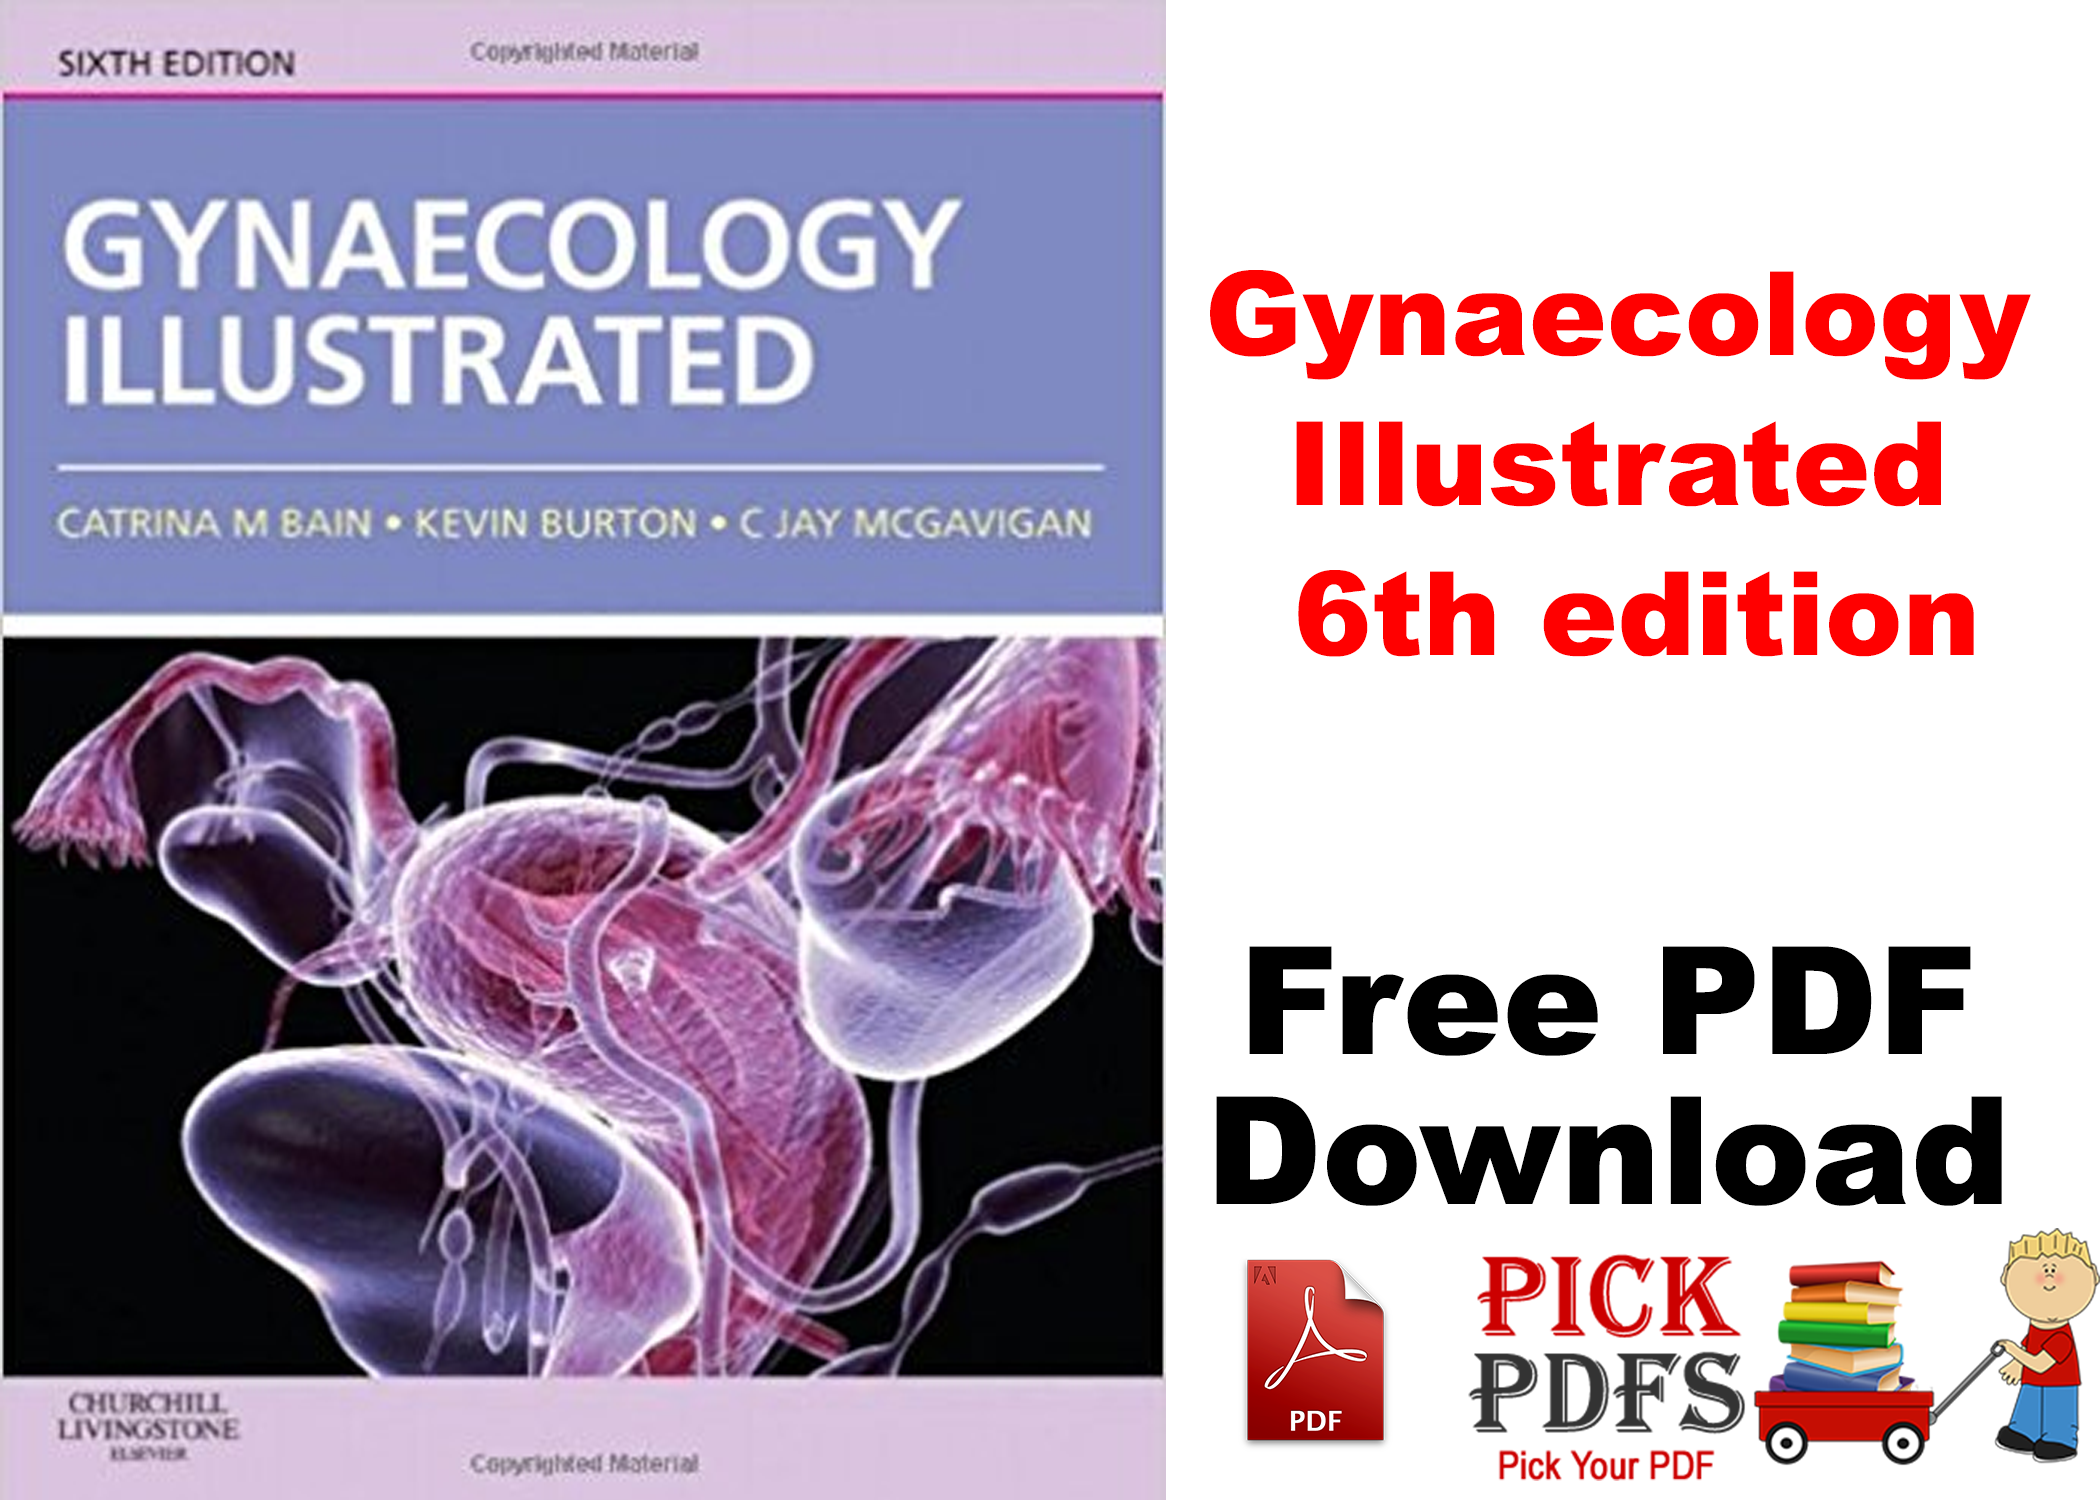 https://pickpdfs.com/abc-of-the-upper-gastrointestinal-tract-pdf-free-pdf-pickpdfs-medical-books/